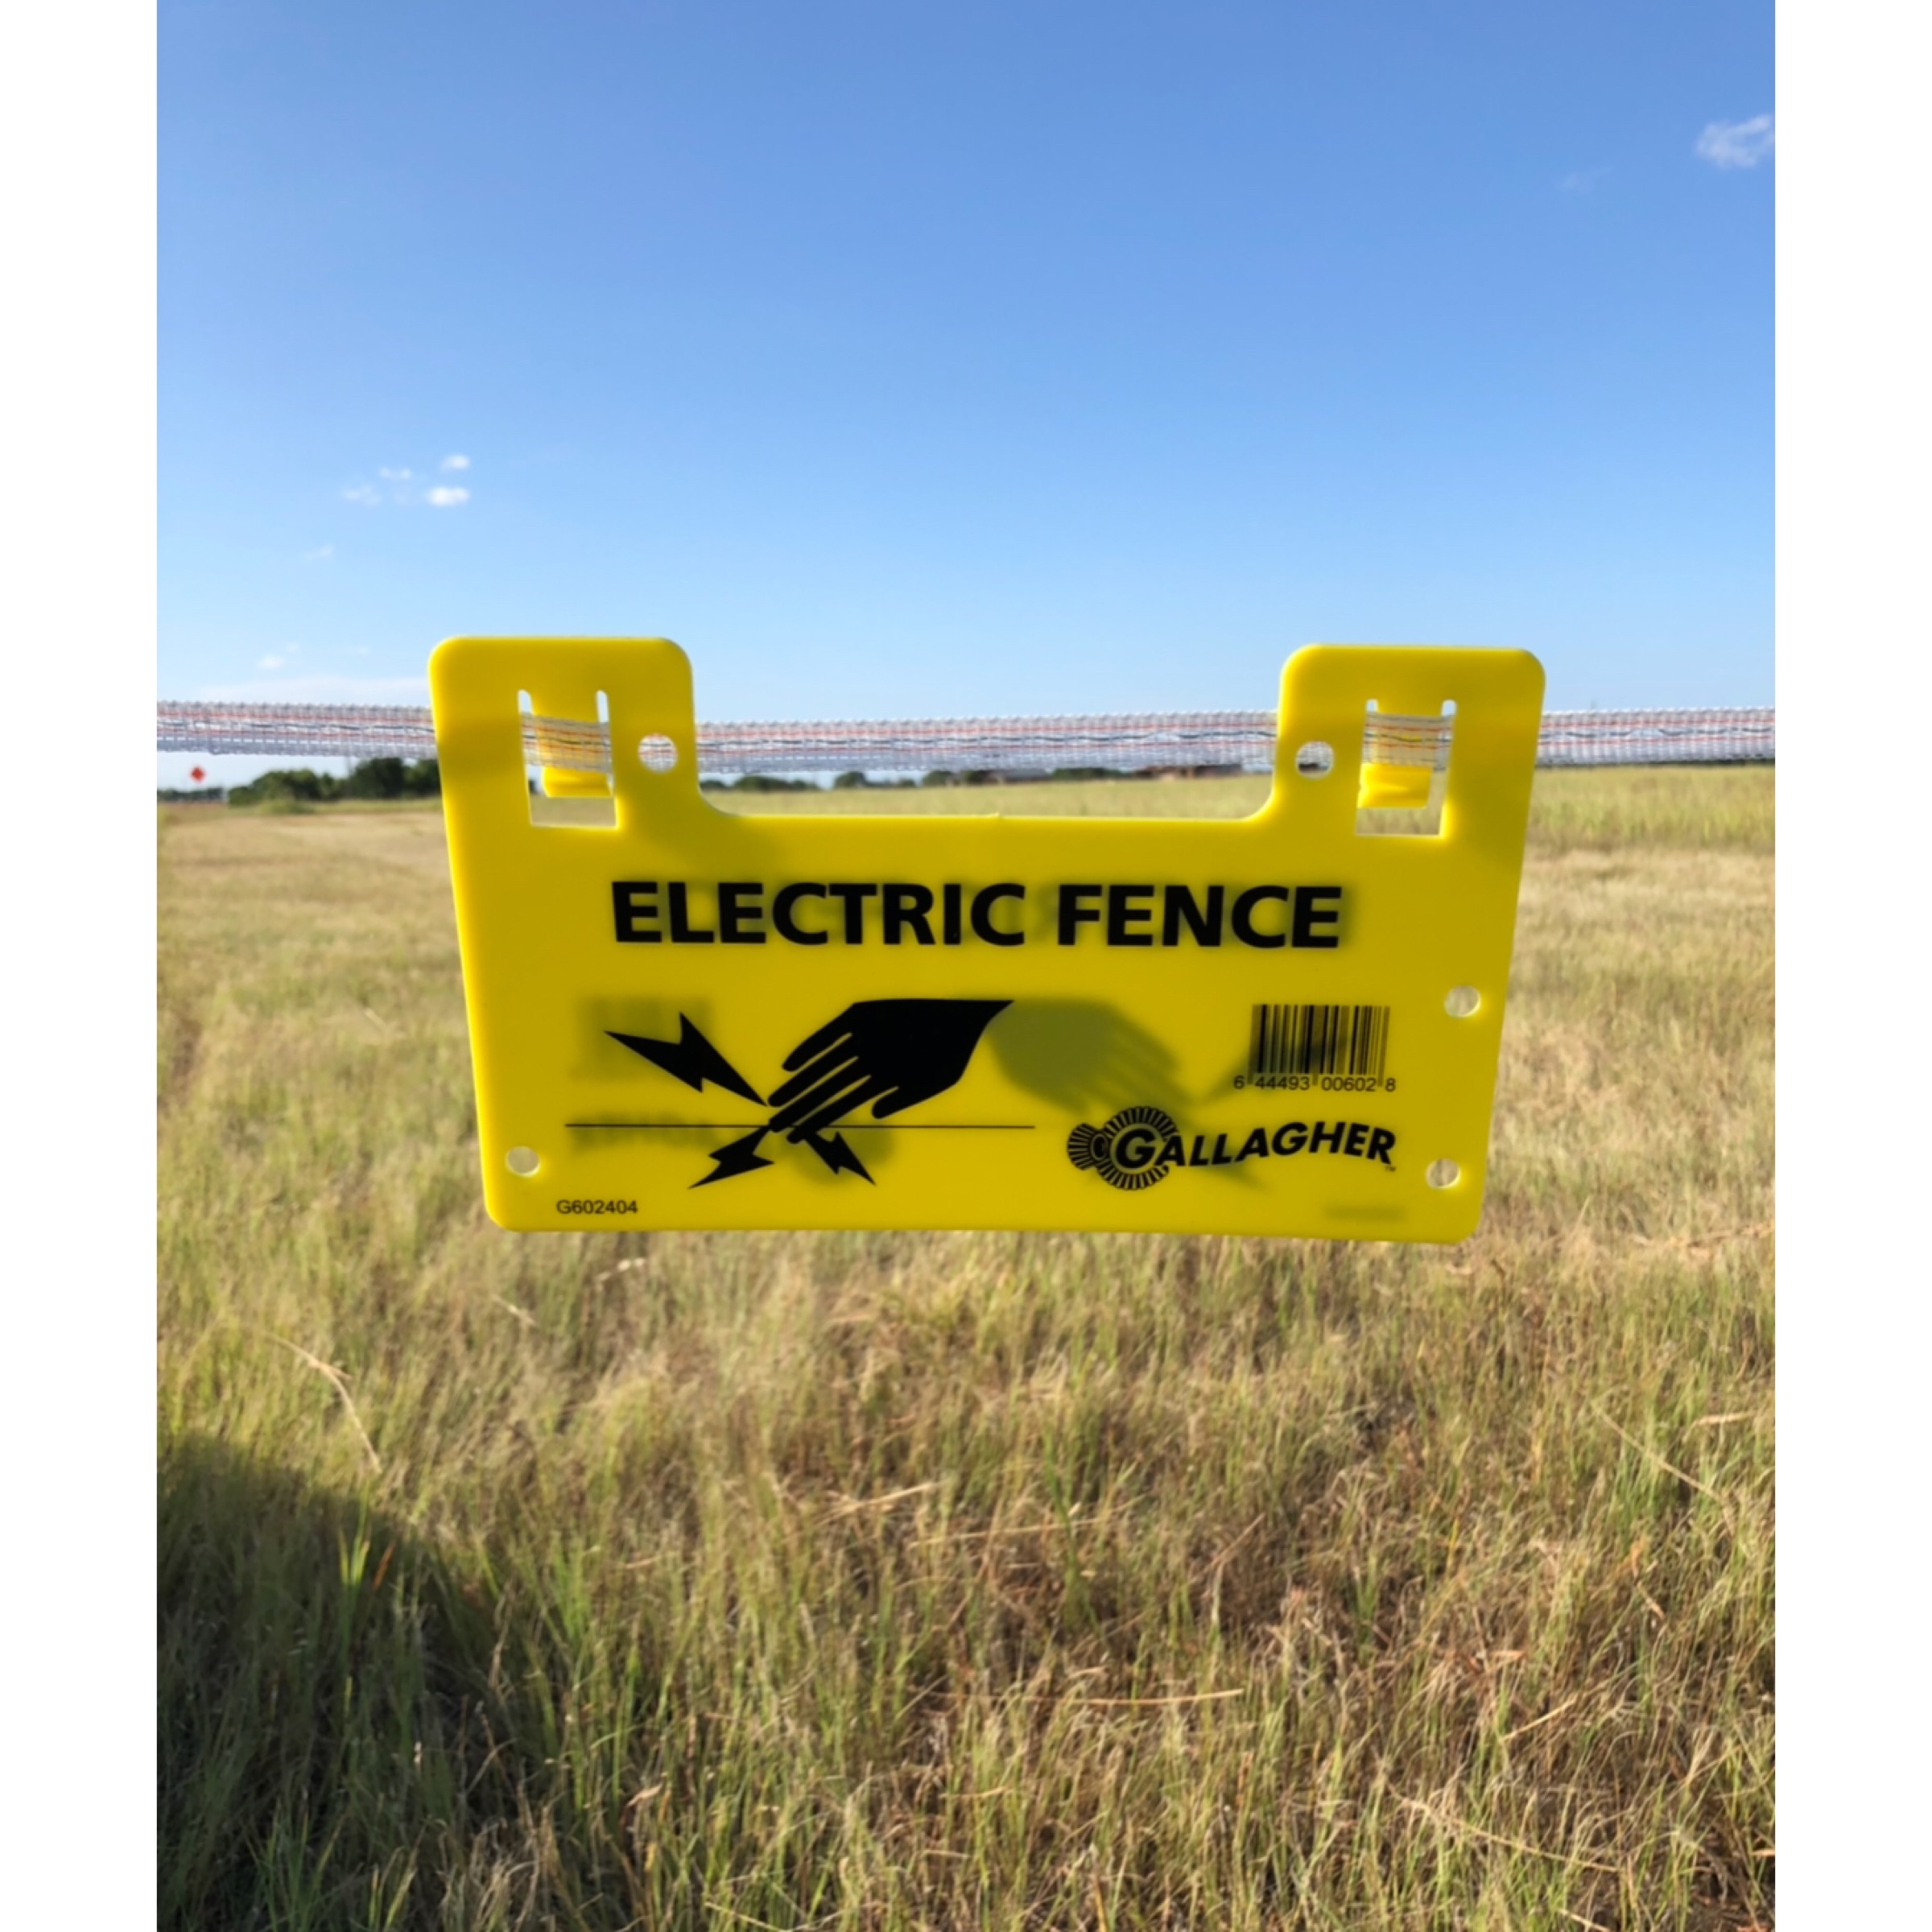 Electric Fence Sign.JPG